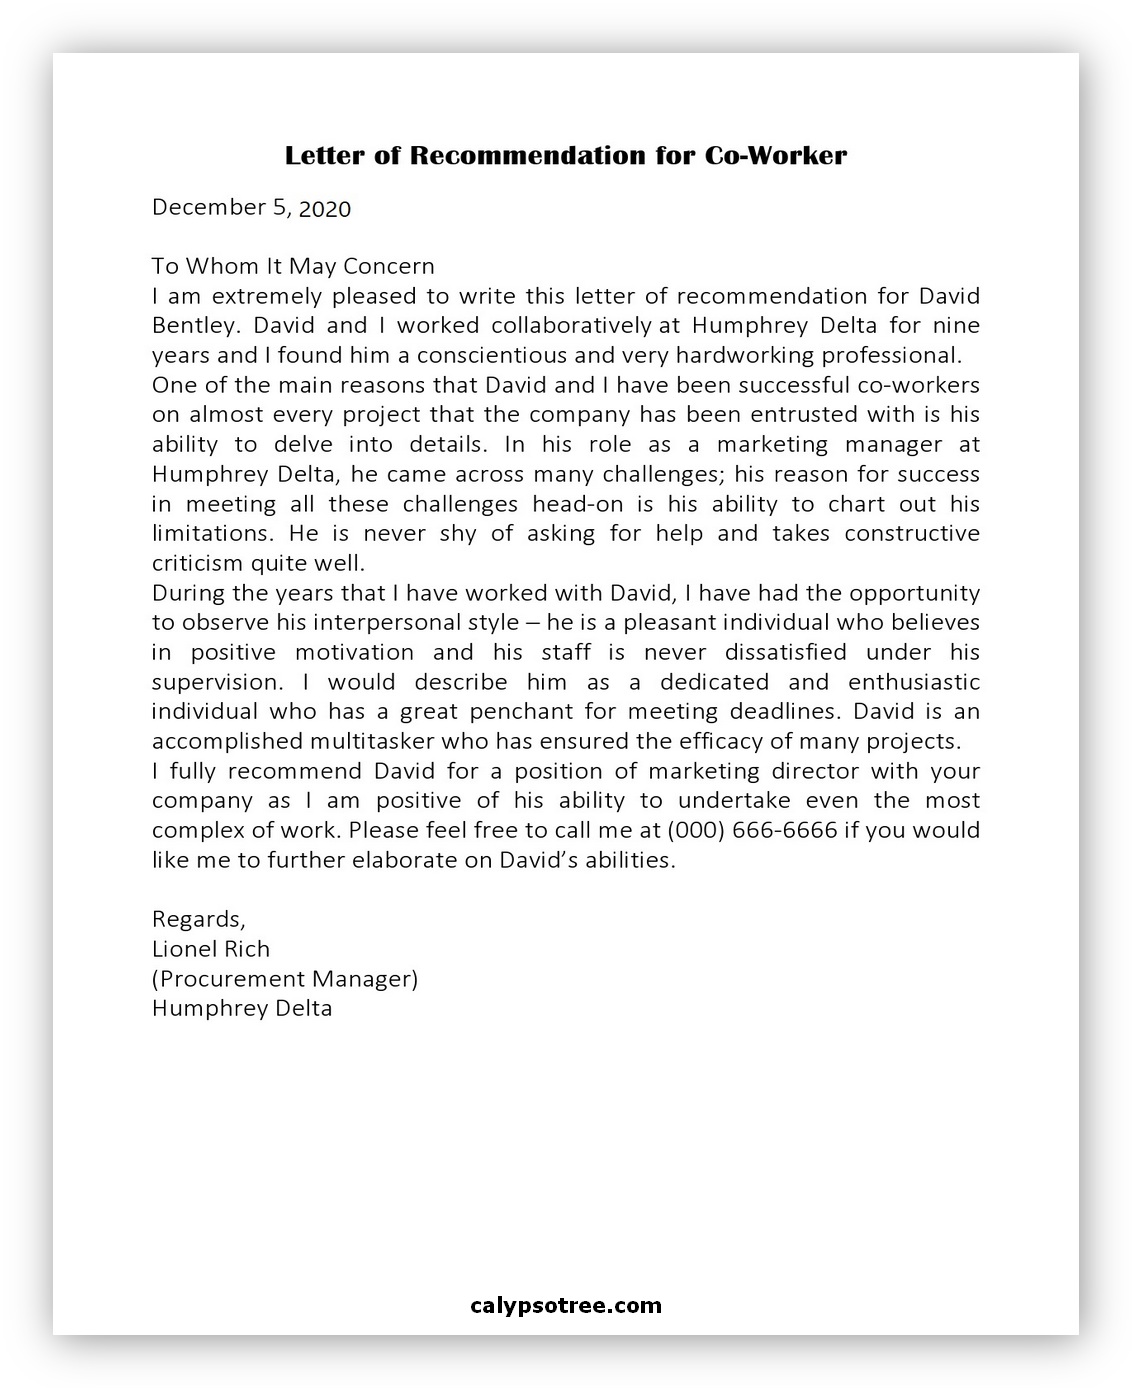 Letter of Recommendation for Coworker 01